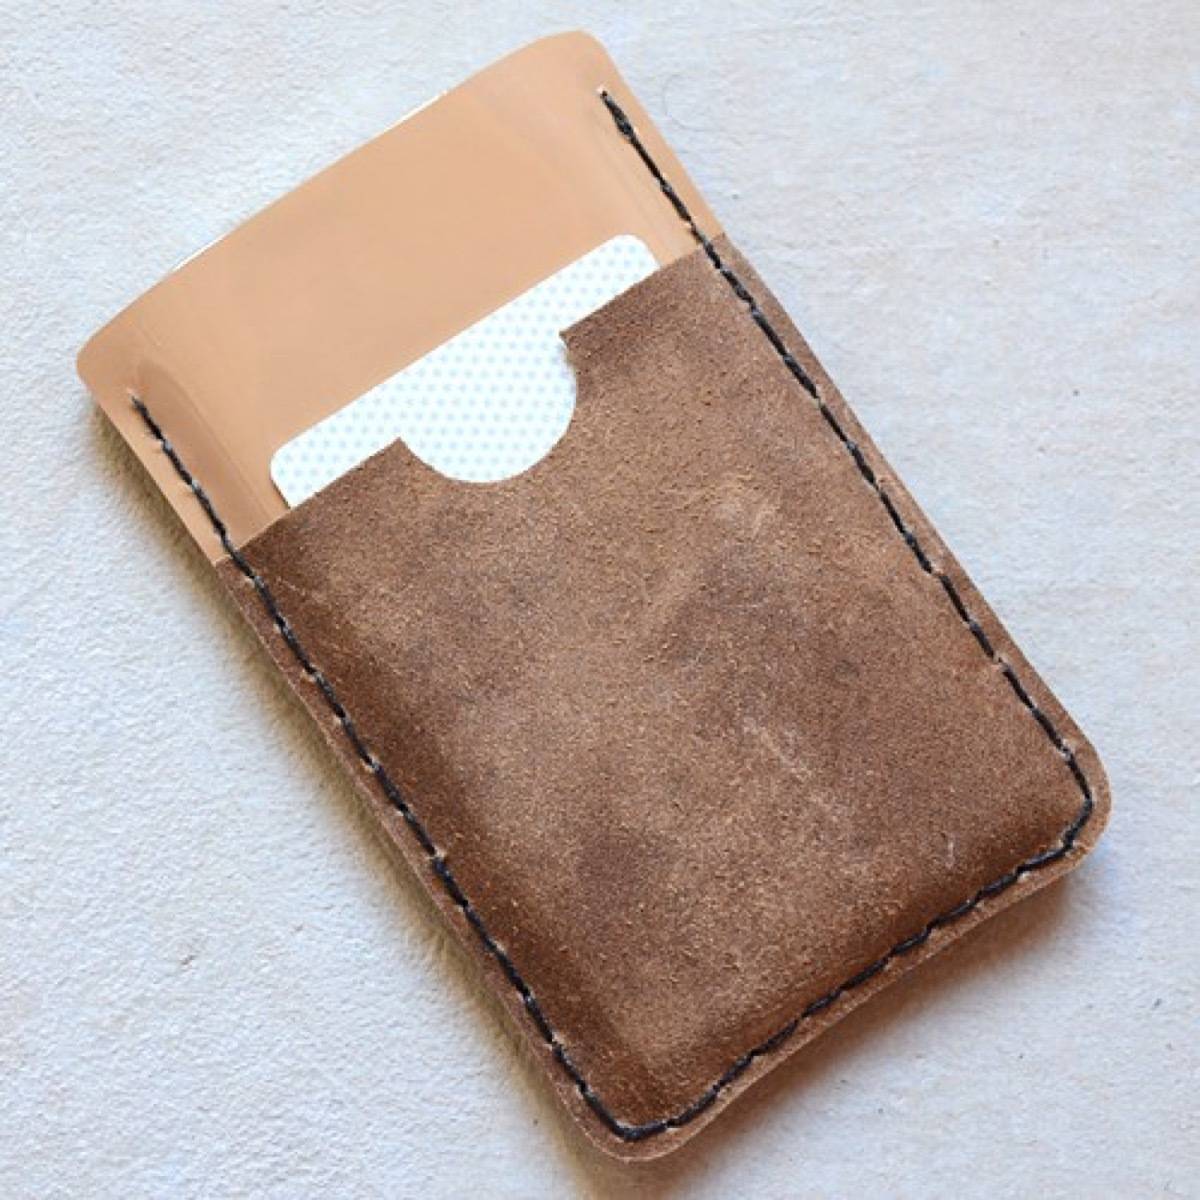 Leather iPhone wallet